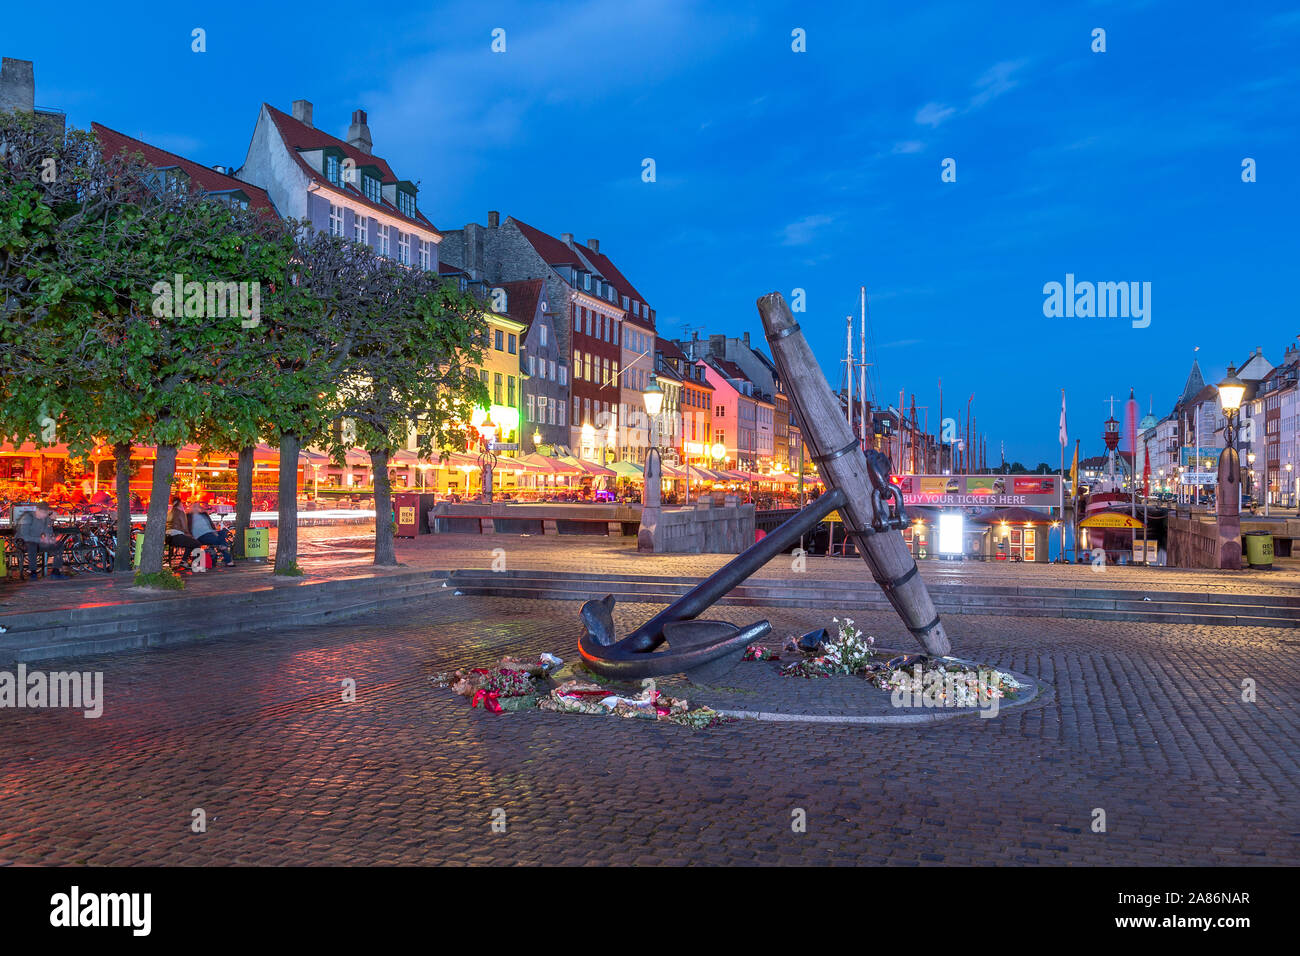 Mindeankeret stock photography images - Alamy